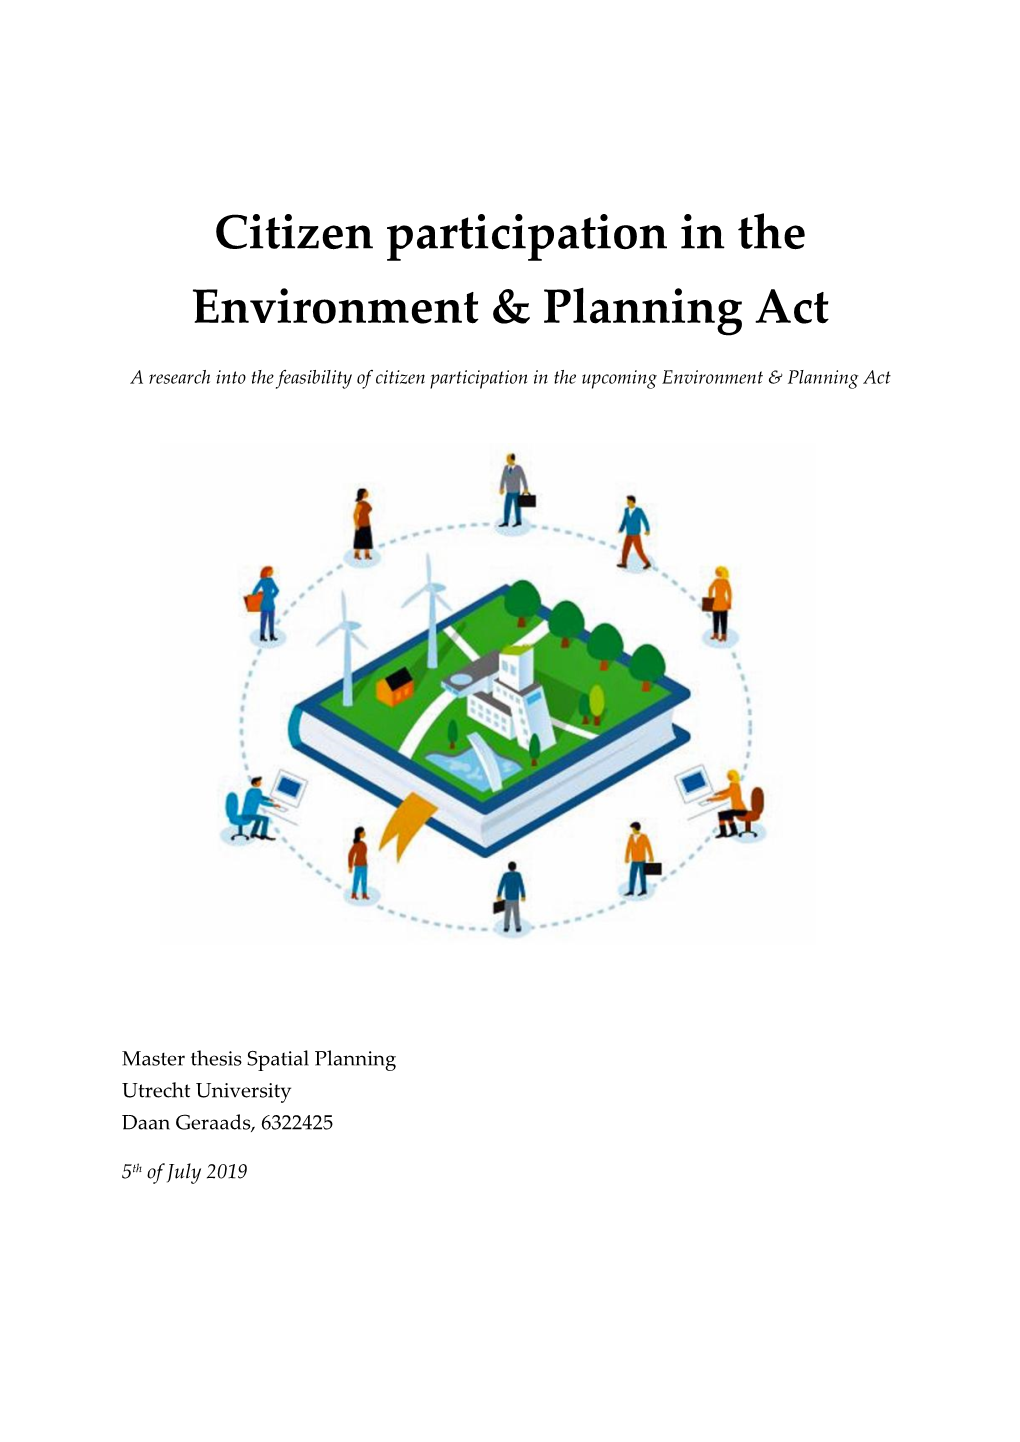 Citizen Participation in the Environment & Planning